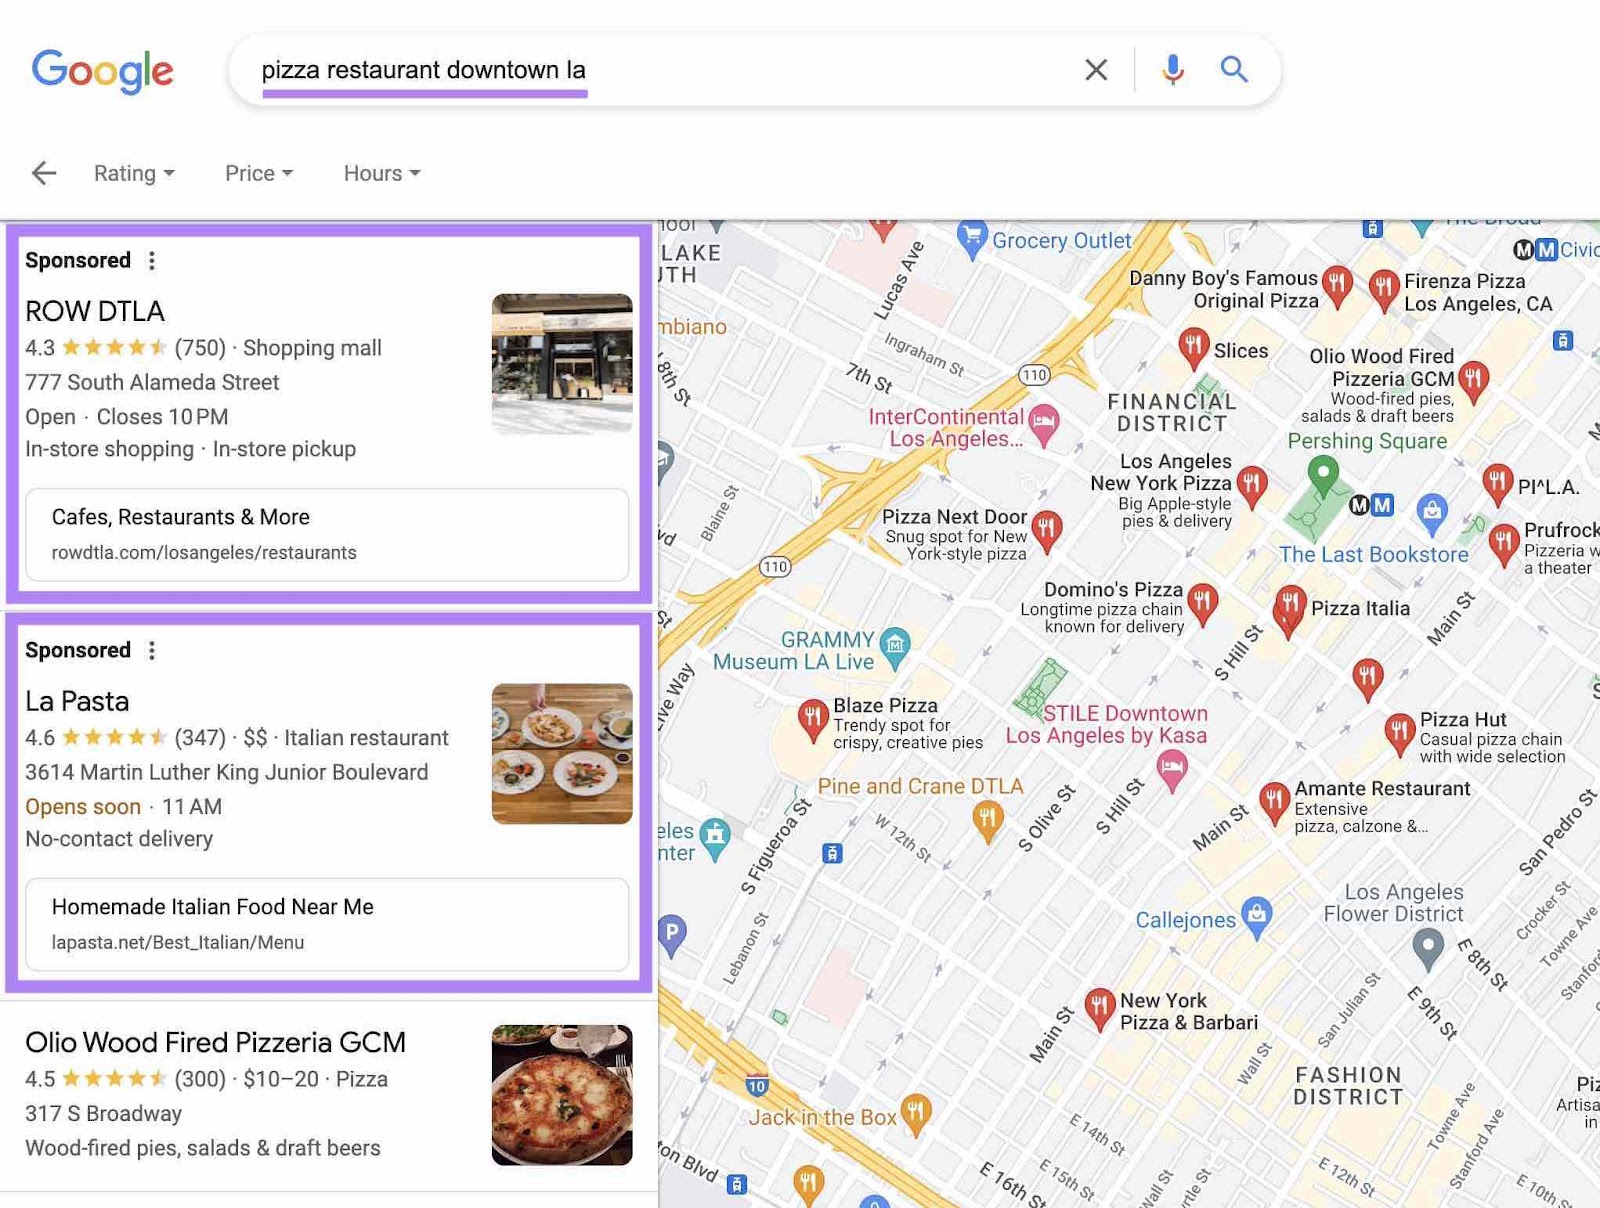 Google results for "pizza edifice  downtown la" showing sponsored results successful  the section  finder.